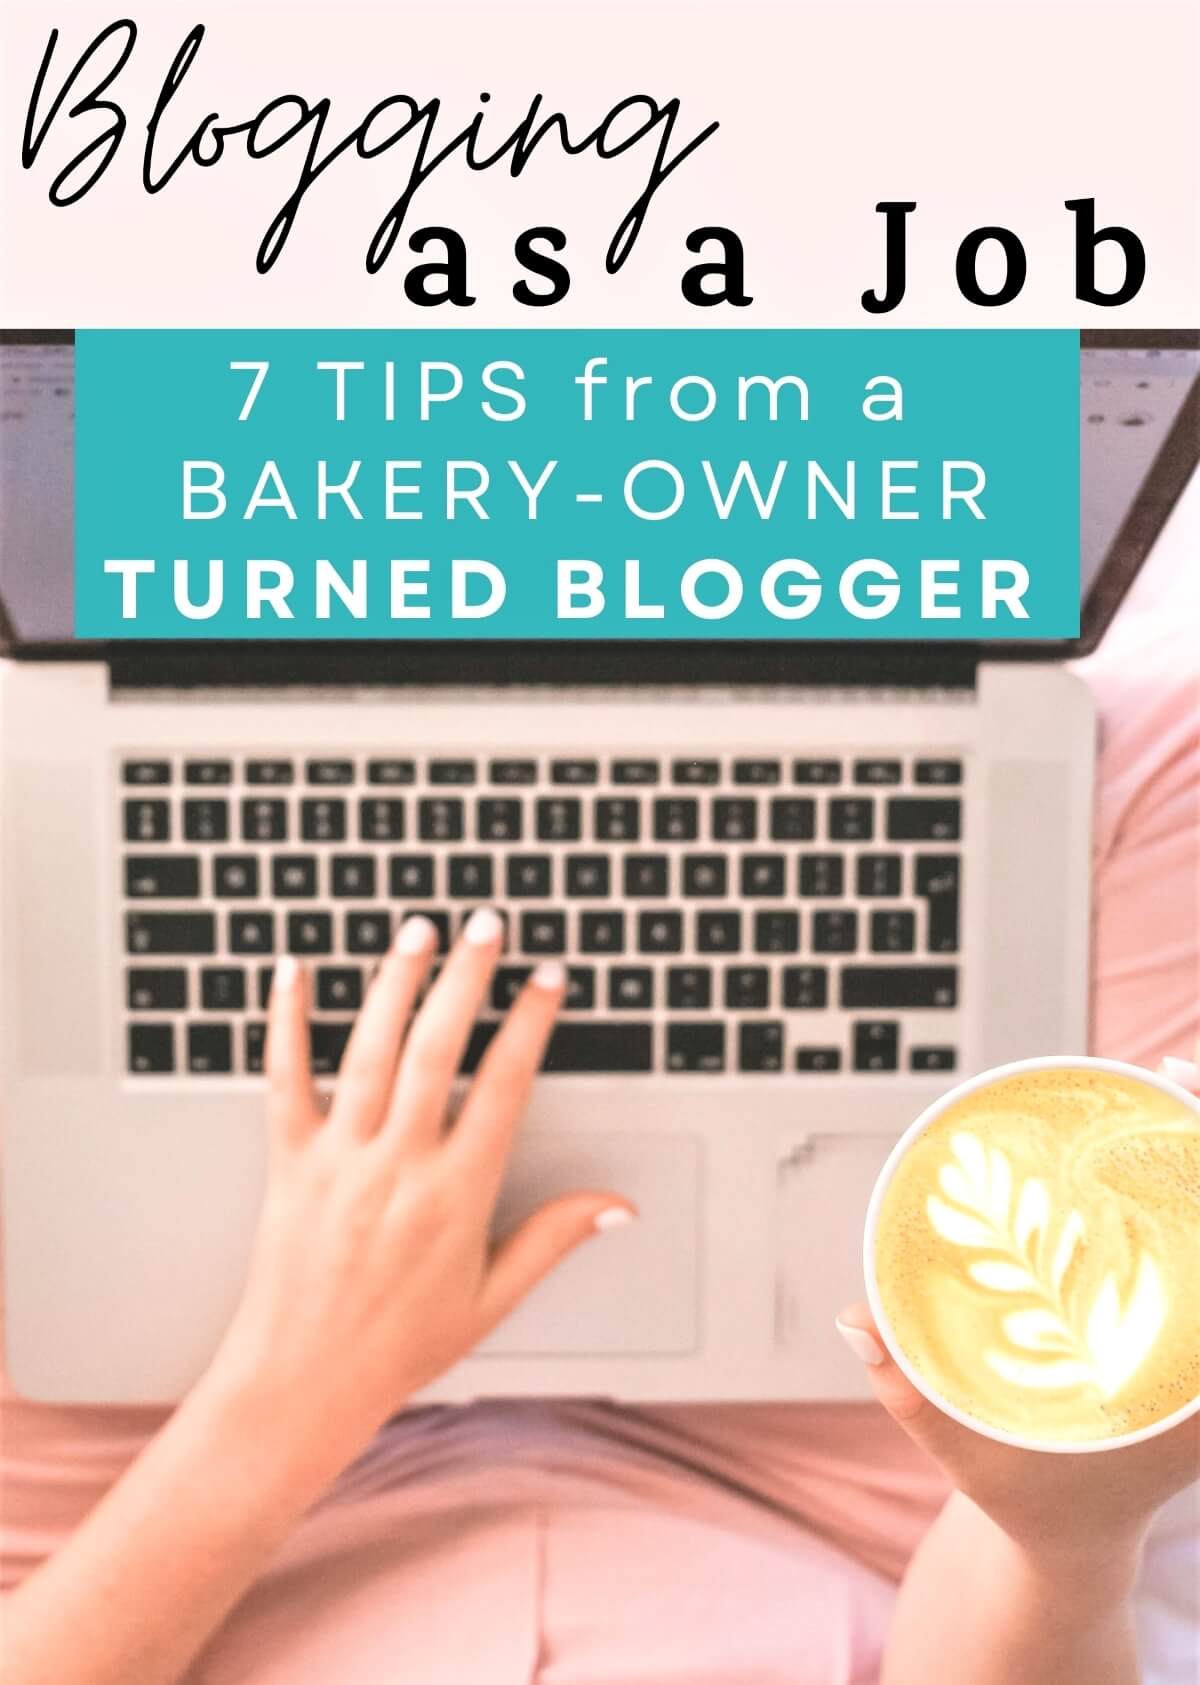 an image of a womans hands with a coffee and a laptop and the words:"blogging as a job", "7 tips from a bakery-owner turned blogger"